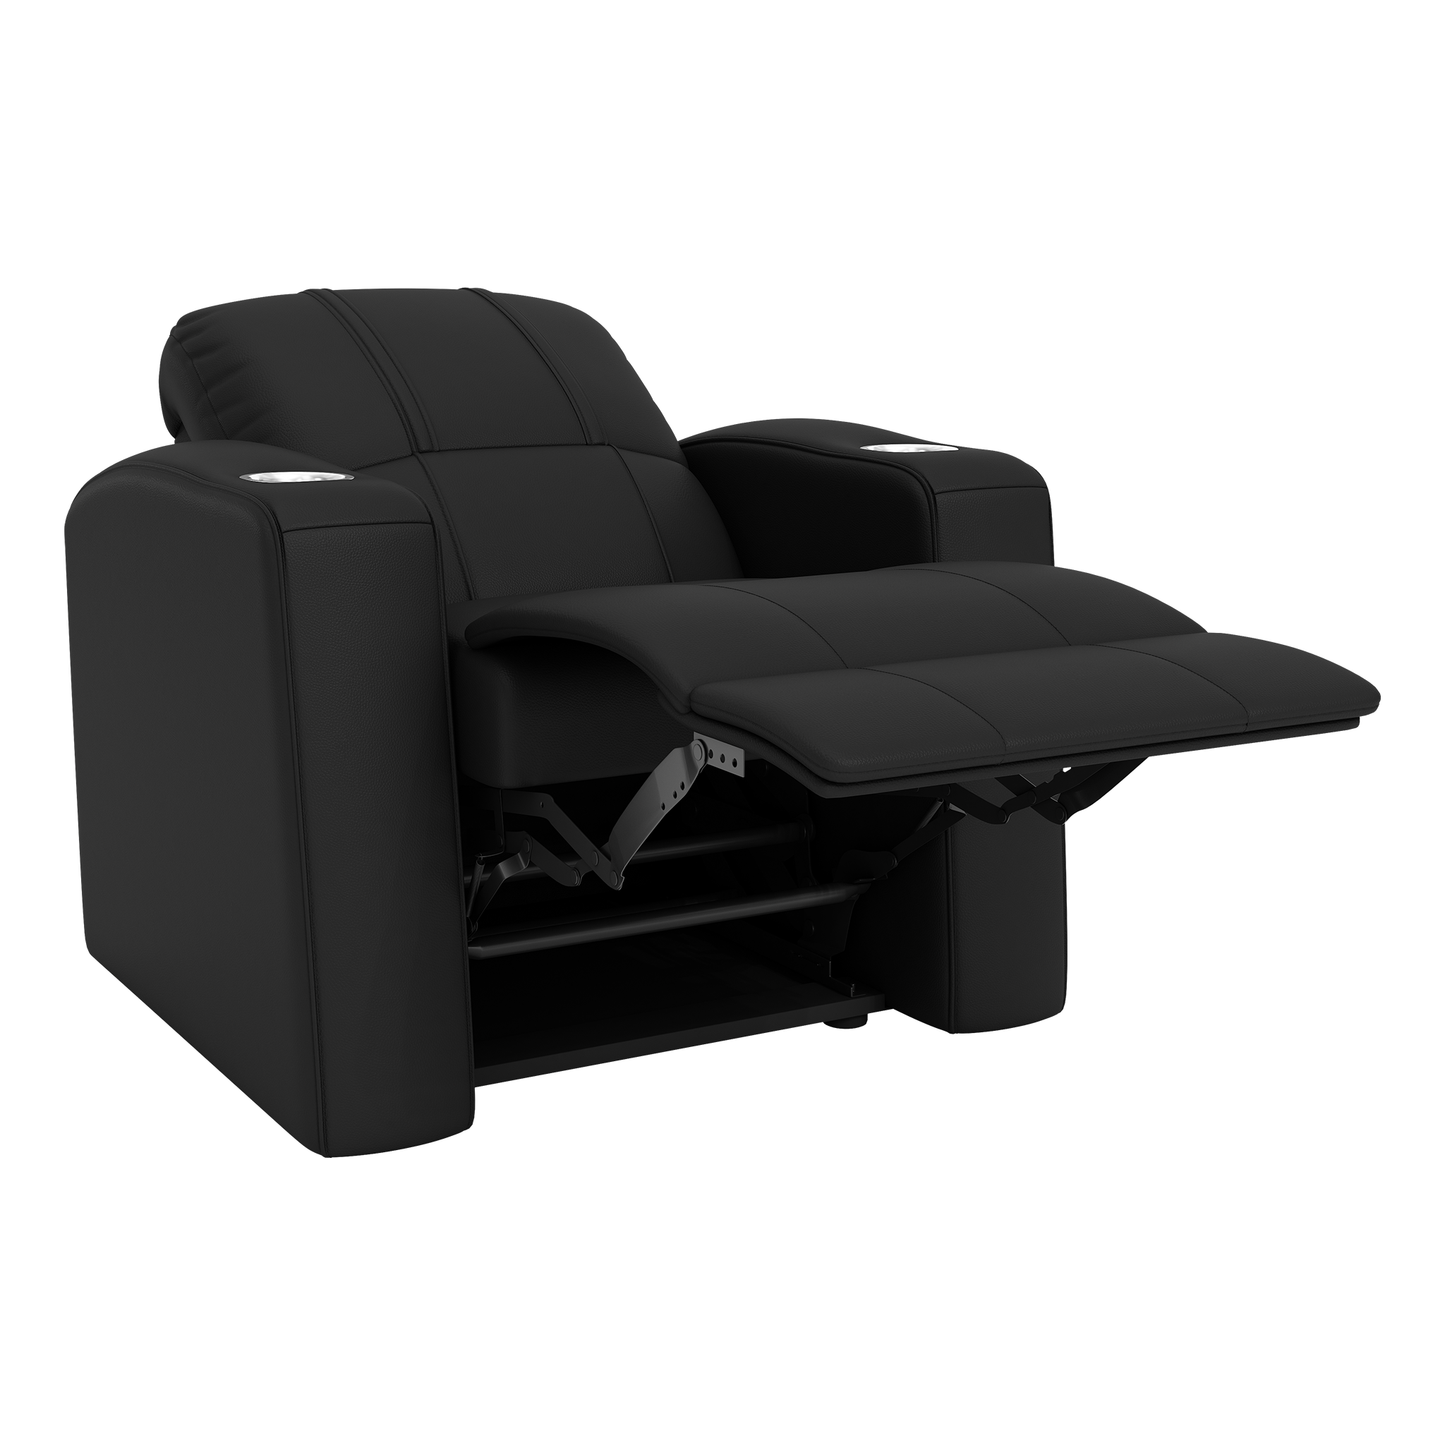 Relax Home Theater Recliner with Georgia State University Secondary Logo